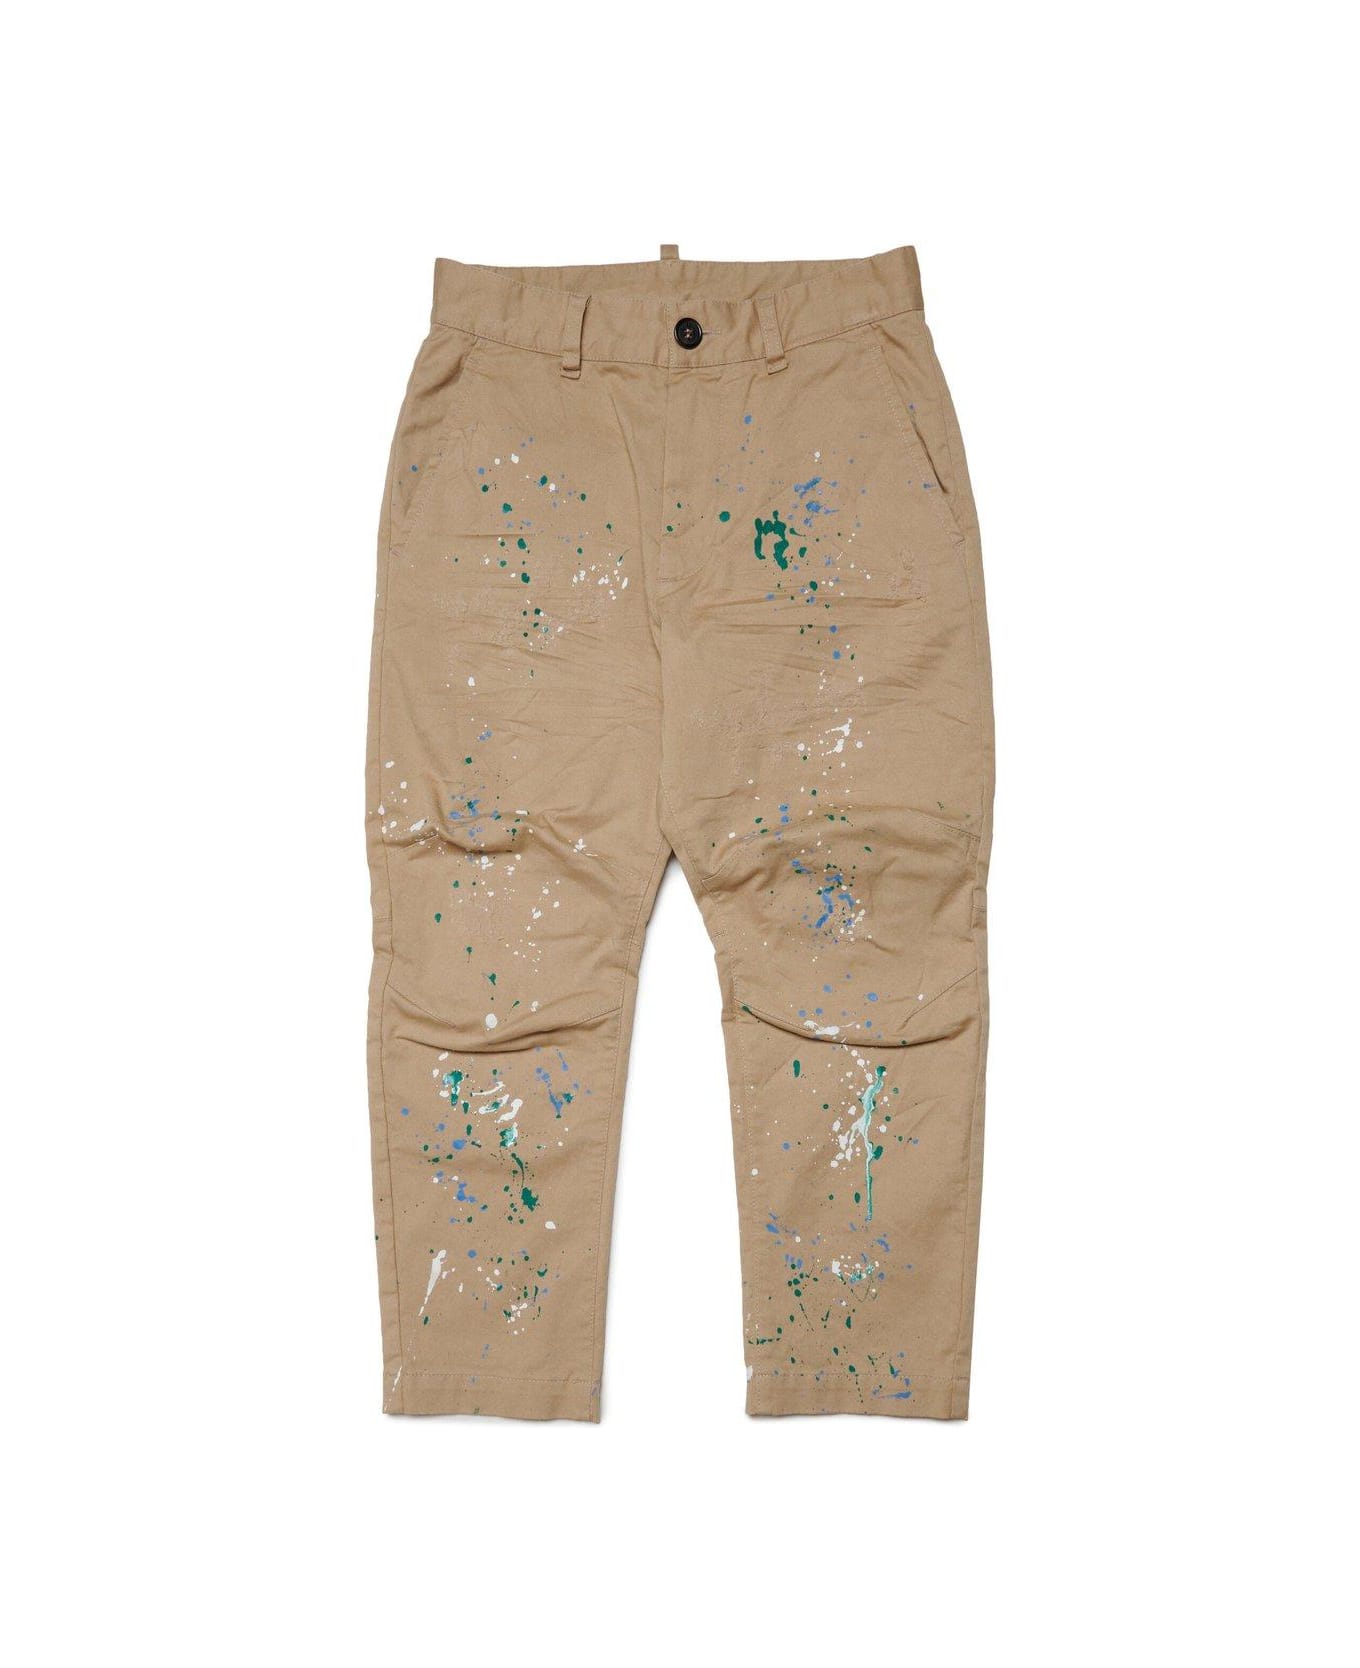 Dsquared2 Paint-splatter Mid-rise Crinkled Chinos - Cream Beige ボトムス